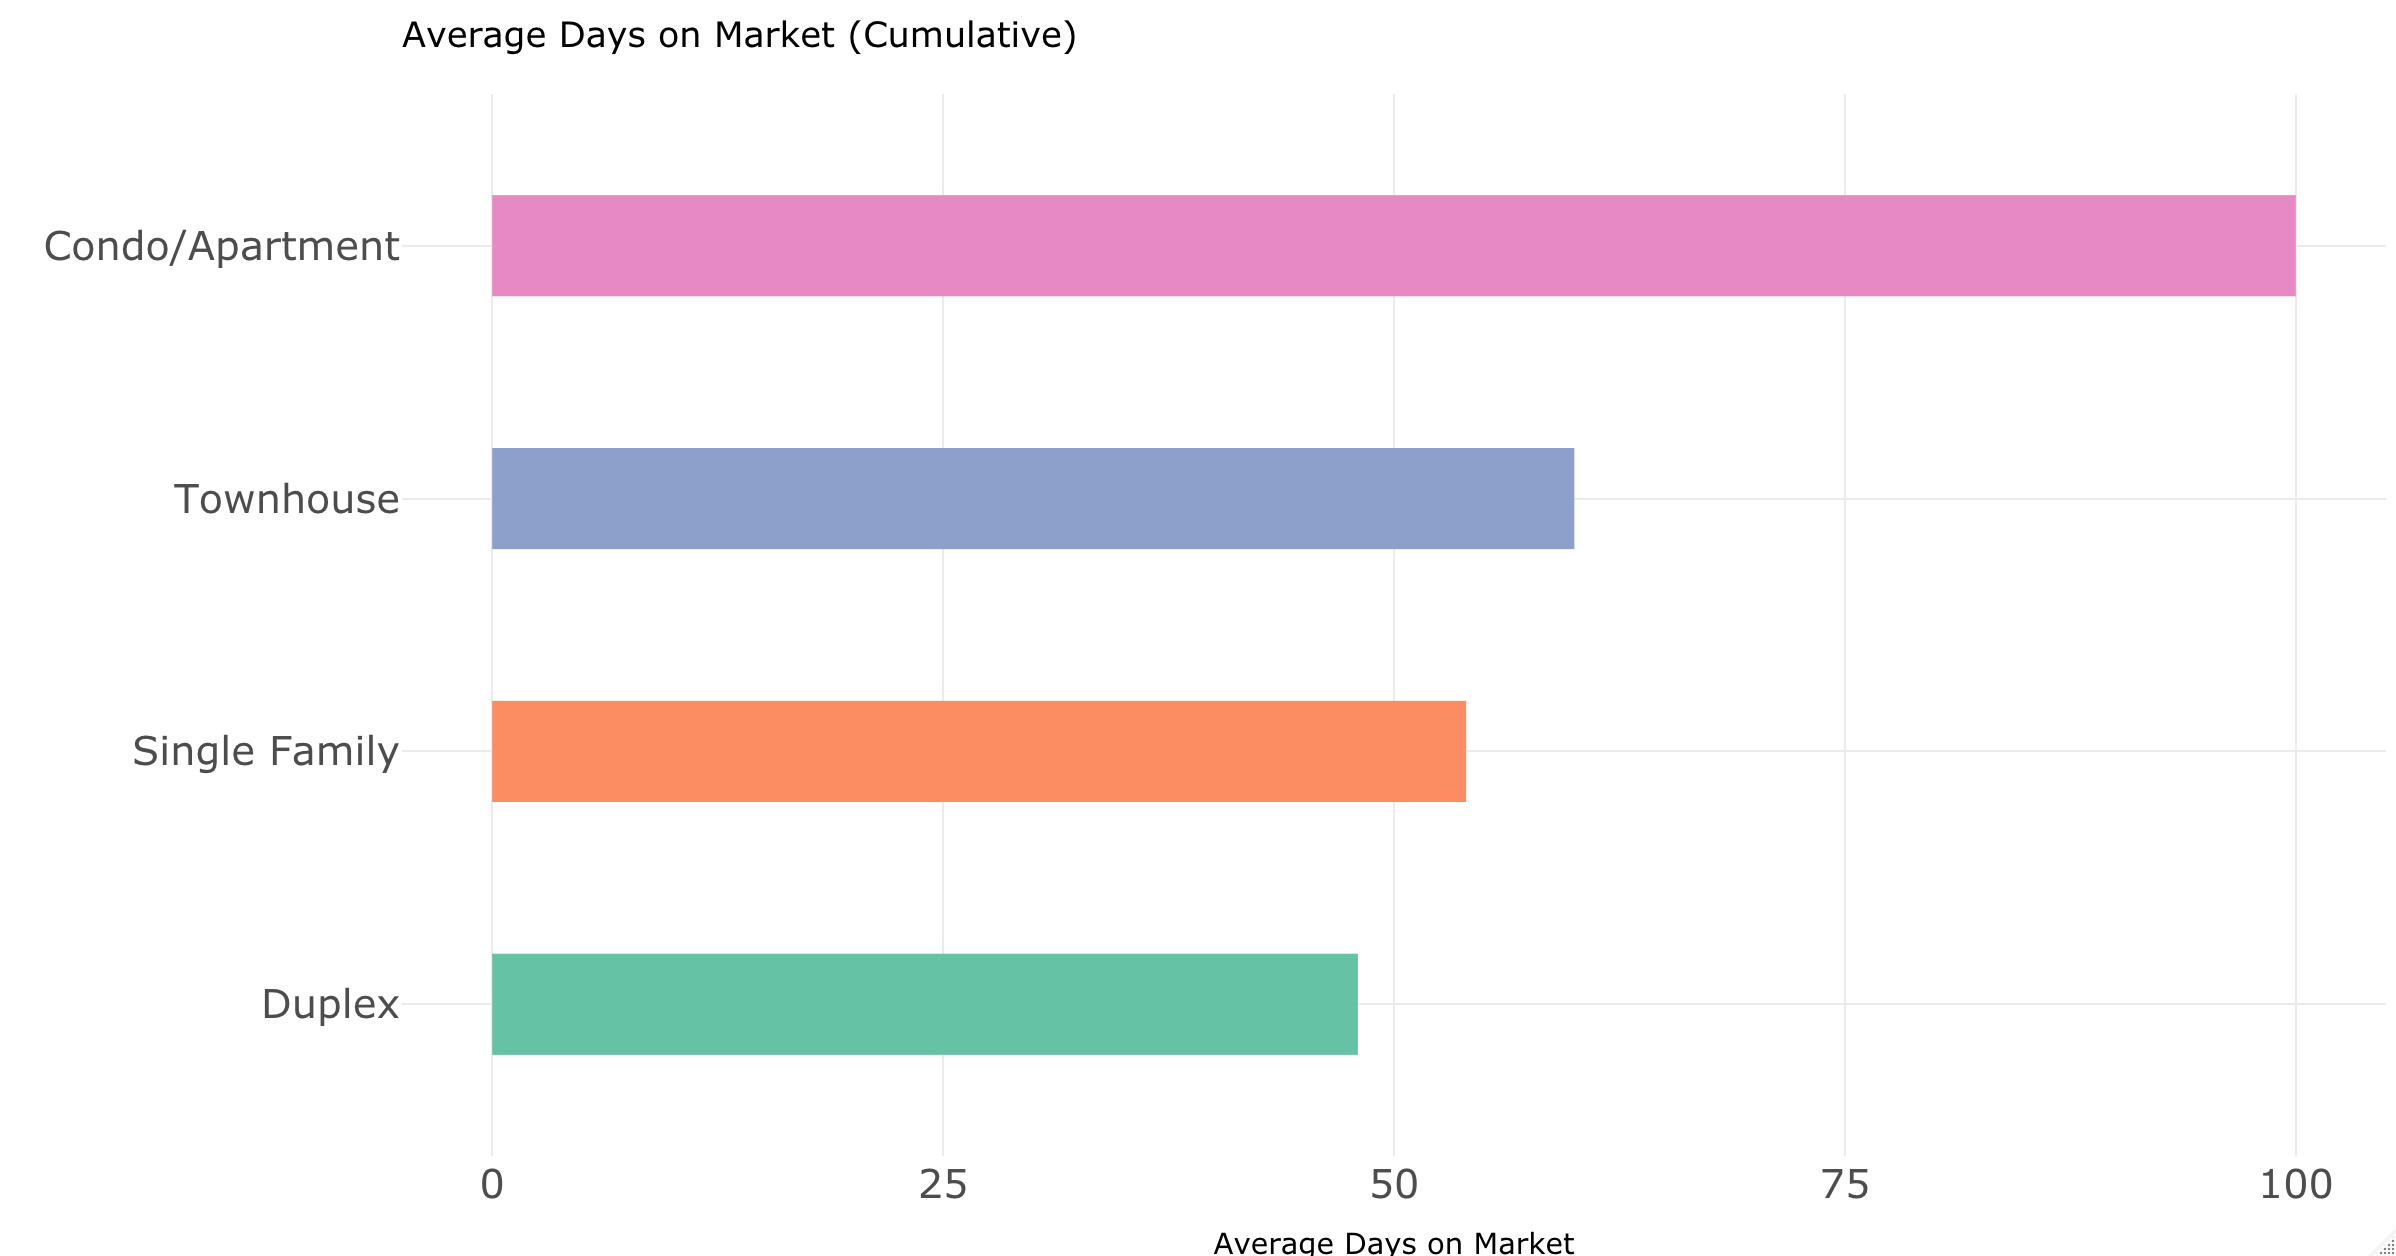 Average days on market for different properties types in Edmonton